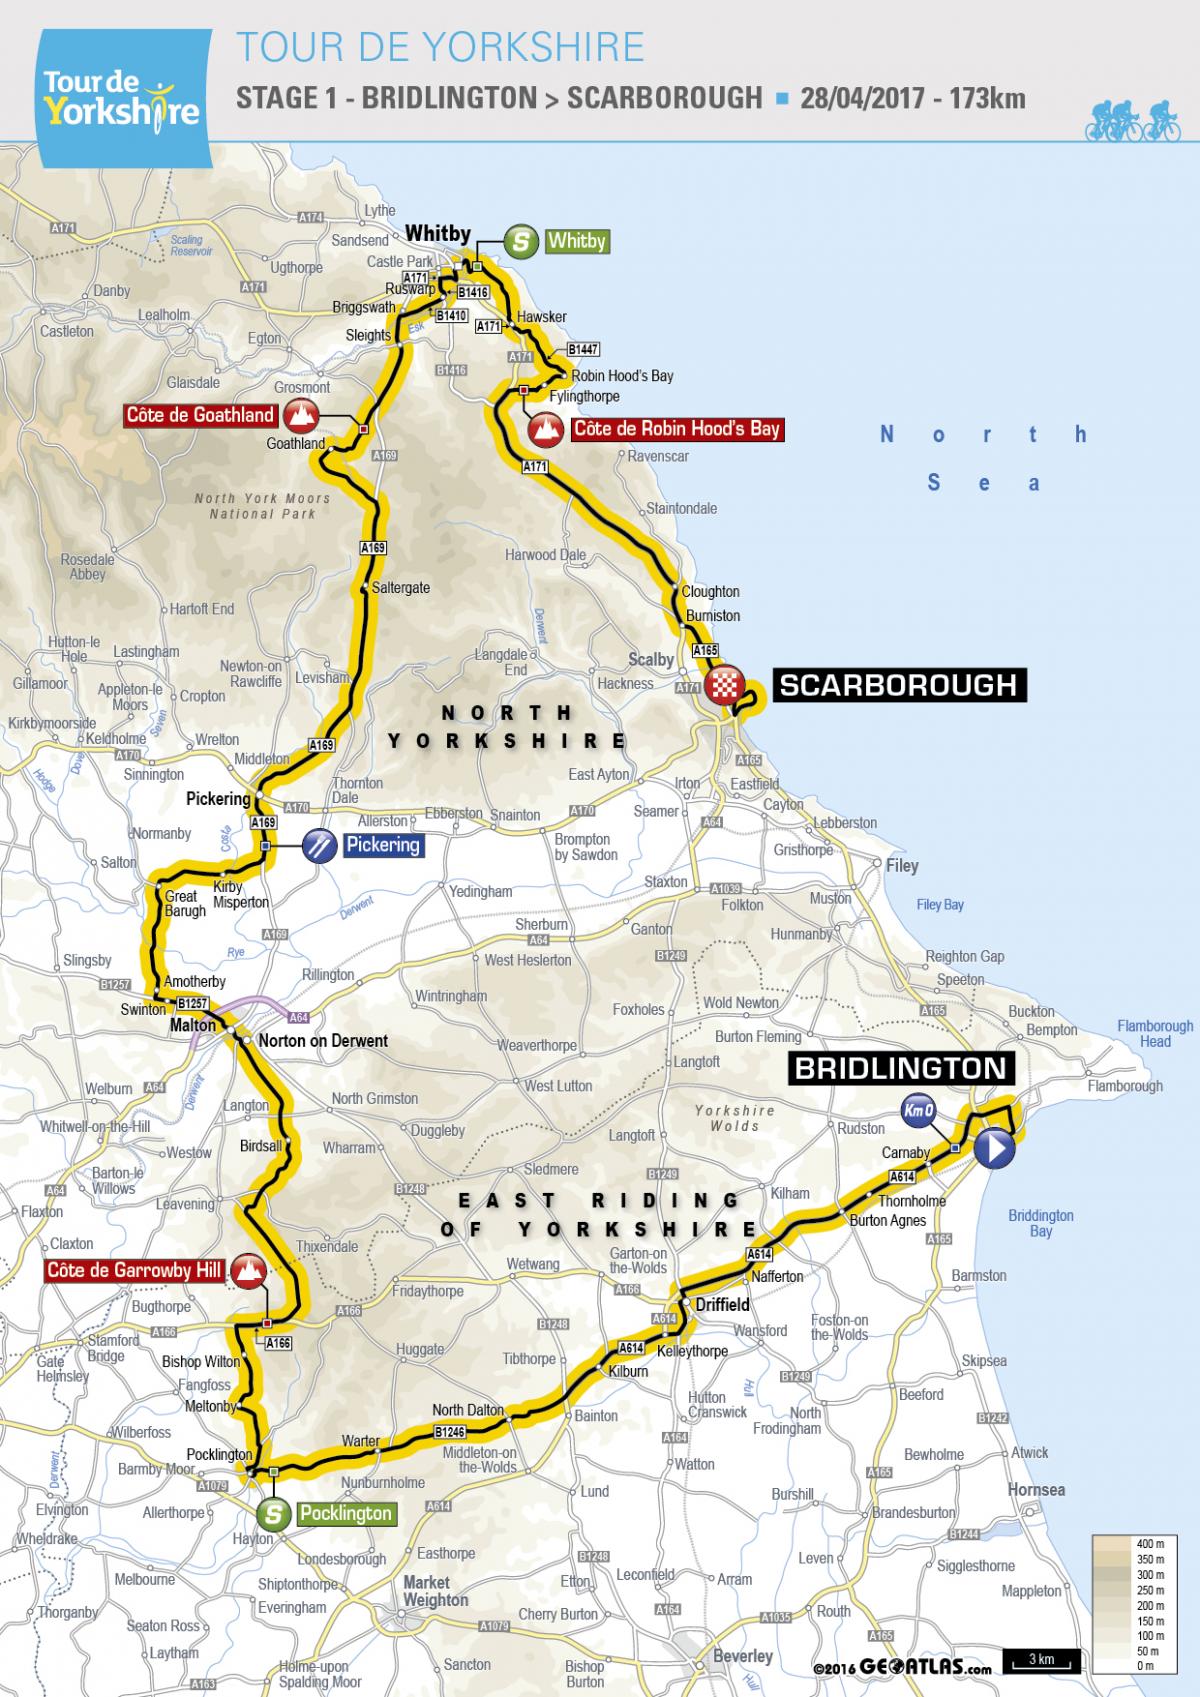 The full route for Stage 1 of the Tour de Yorkshire 2017